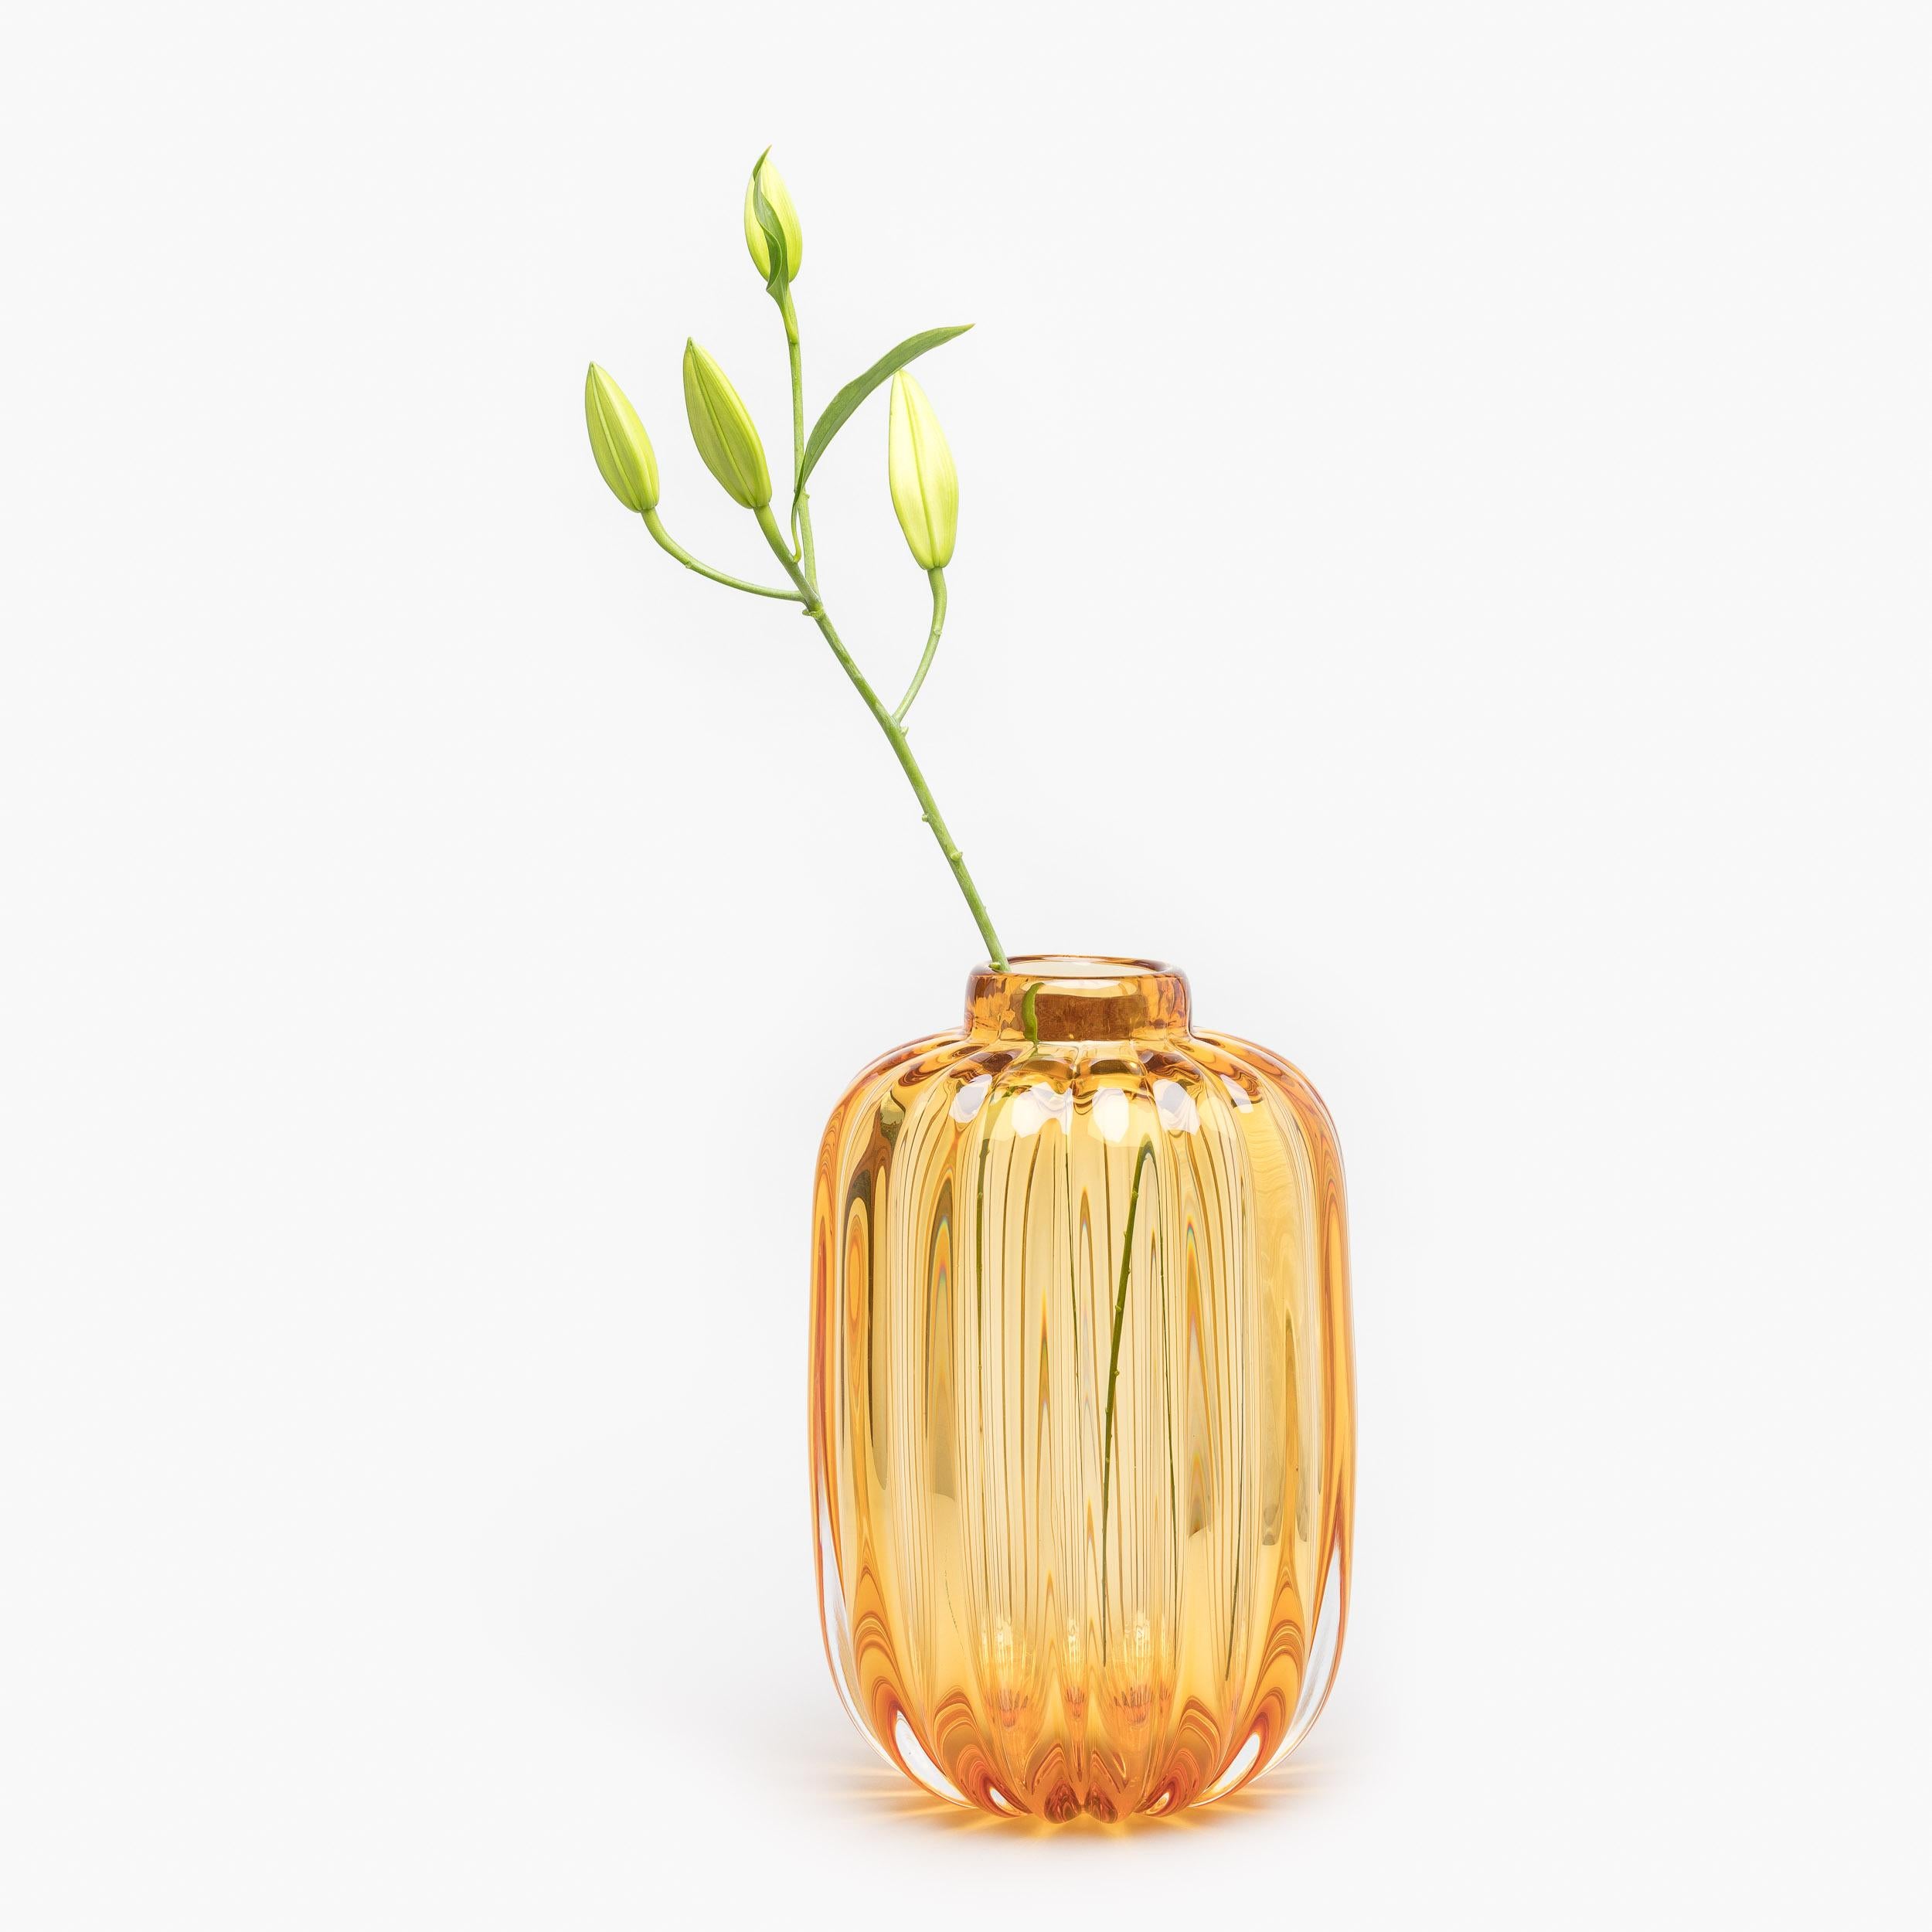 Inspired by the shape and proportions of vintage storage jars, the Fiori Jar vase requires many strong and skilful hands to produce. A heavy portion of molten glass is worked into shape before being mouth blown into an iron mold to produce